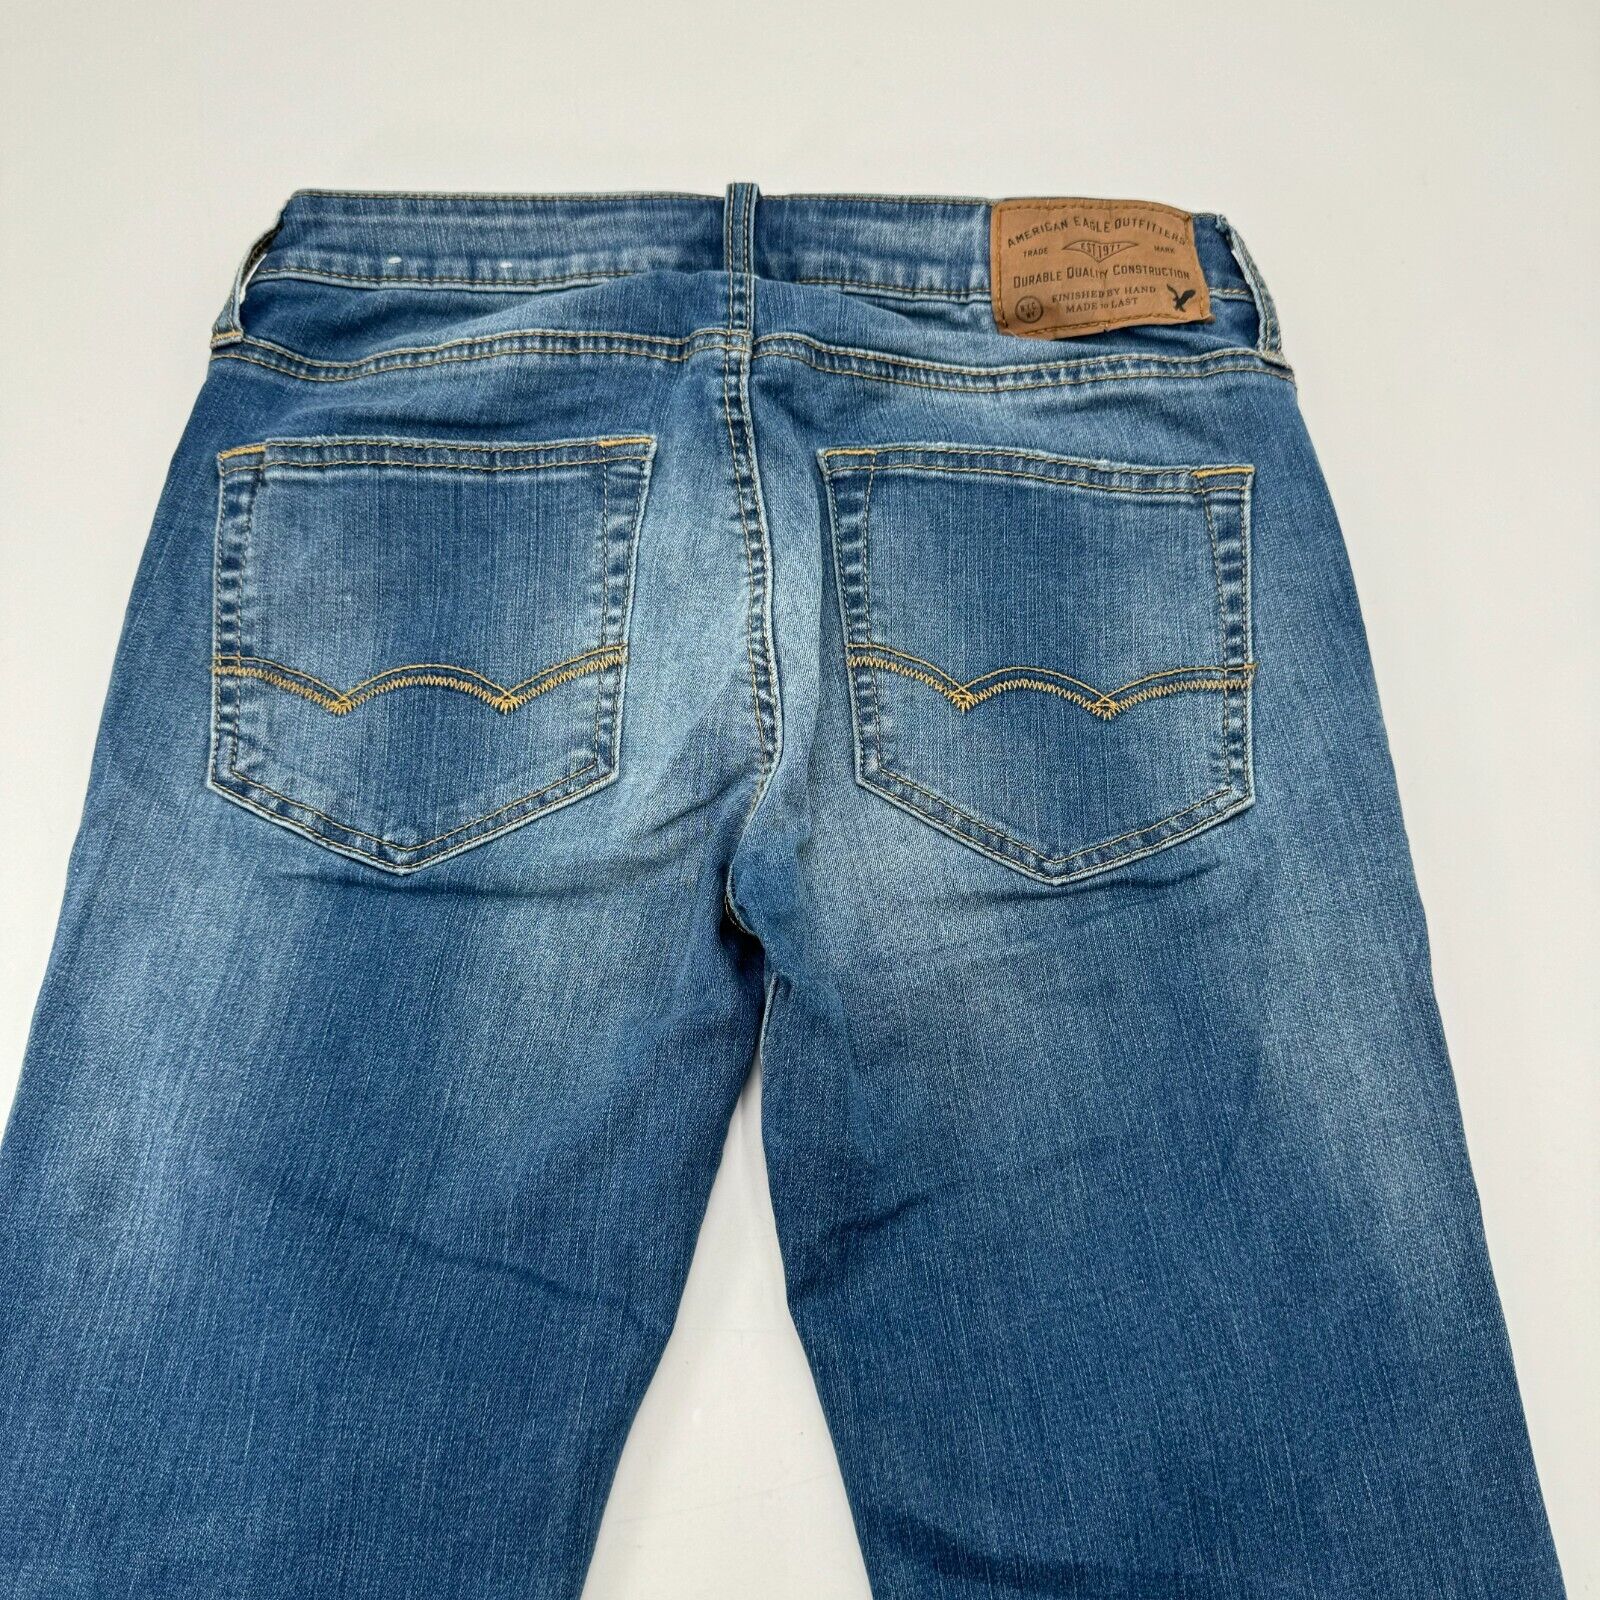 American Eagle Outfitters Extreme Flex Skinny Blue Wash Jeans Mens Size 28x28